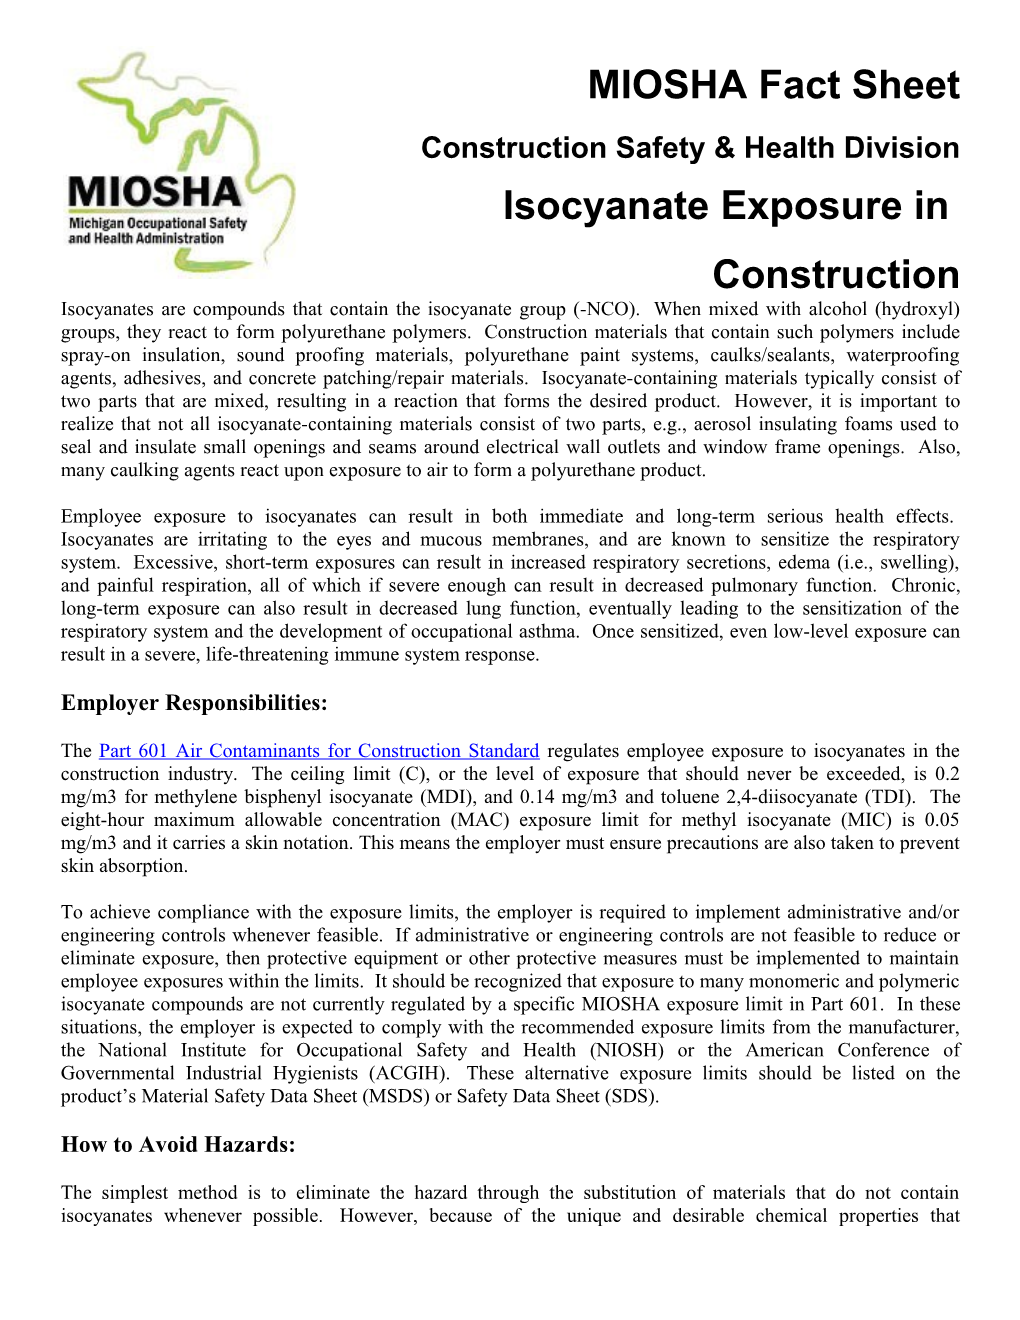 Isocyanate Exposure in Construction